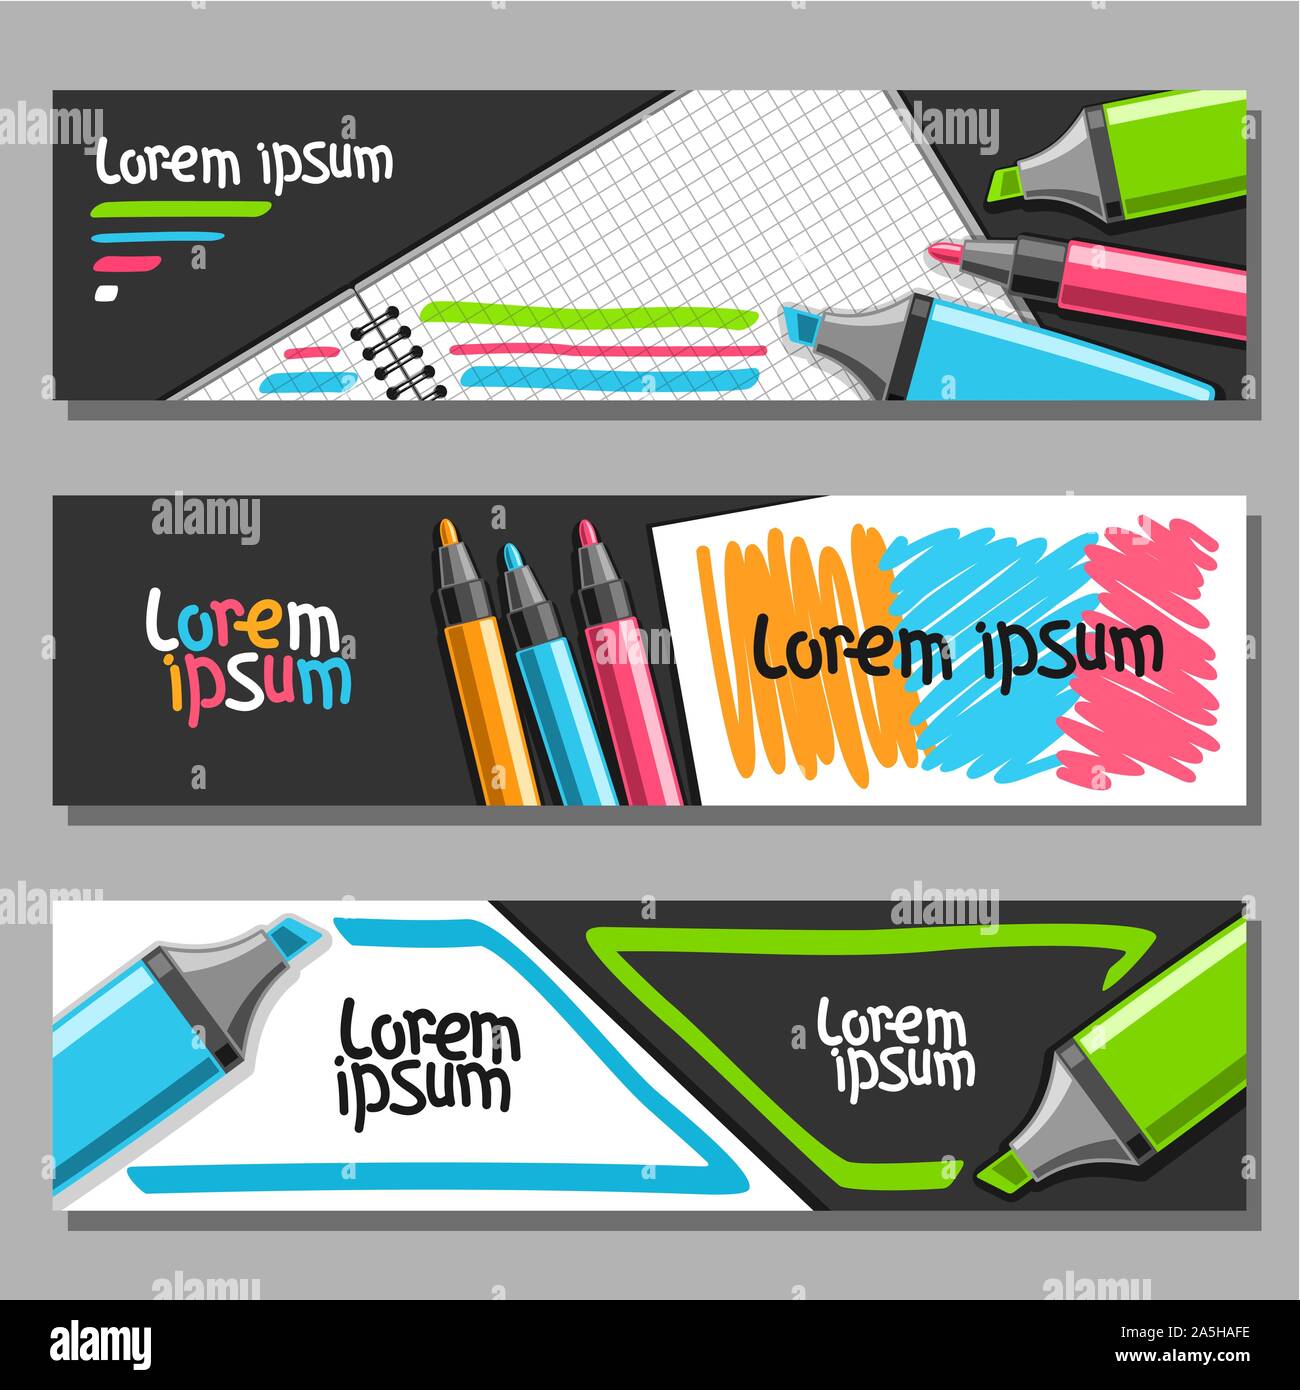 https://c8.alamy.com/comp/2A5HAFE/vector-set-of-horizontal-banners-with-colorful-markers-3-layouts-for-website-headers-with-blank-checkered-note-book-set-of-vivid-felt-tip-pens-and-h-2A5HAFE.jpg